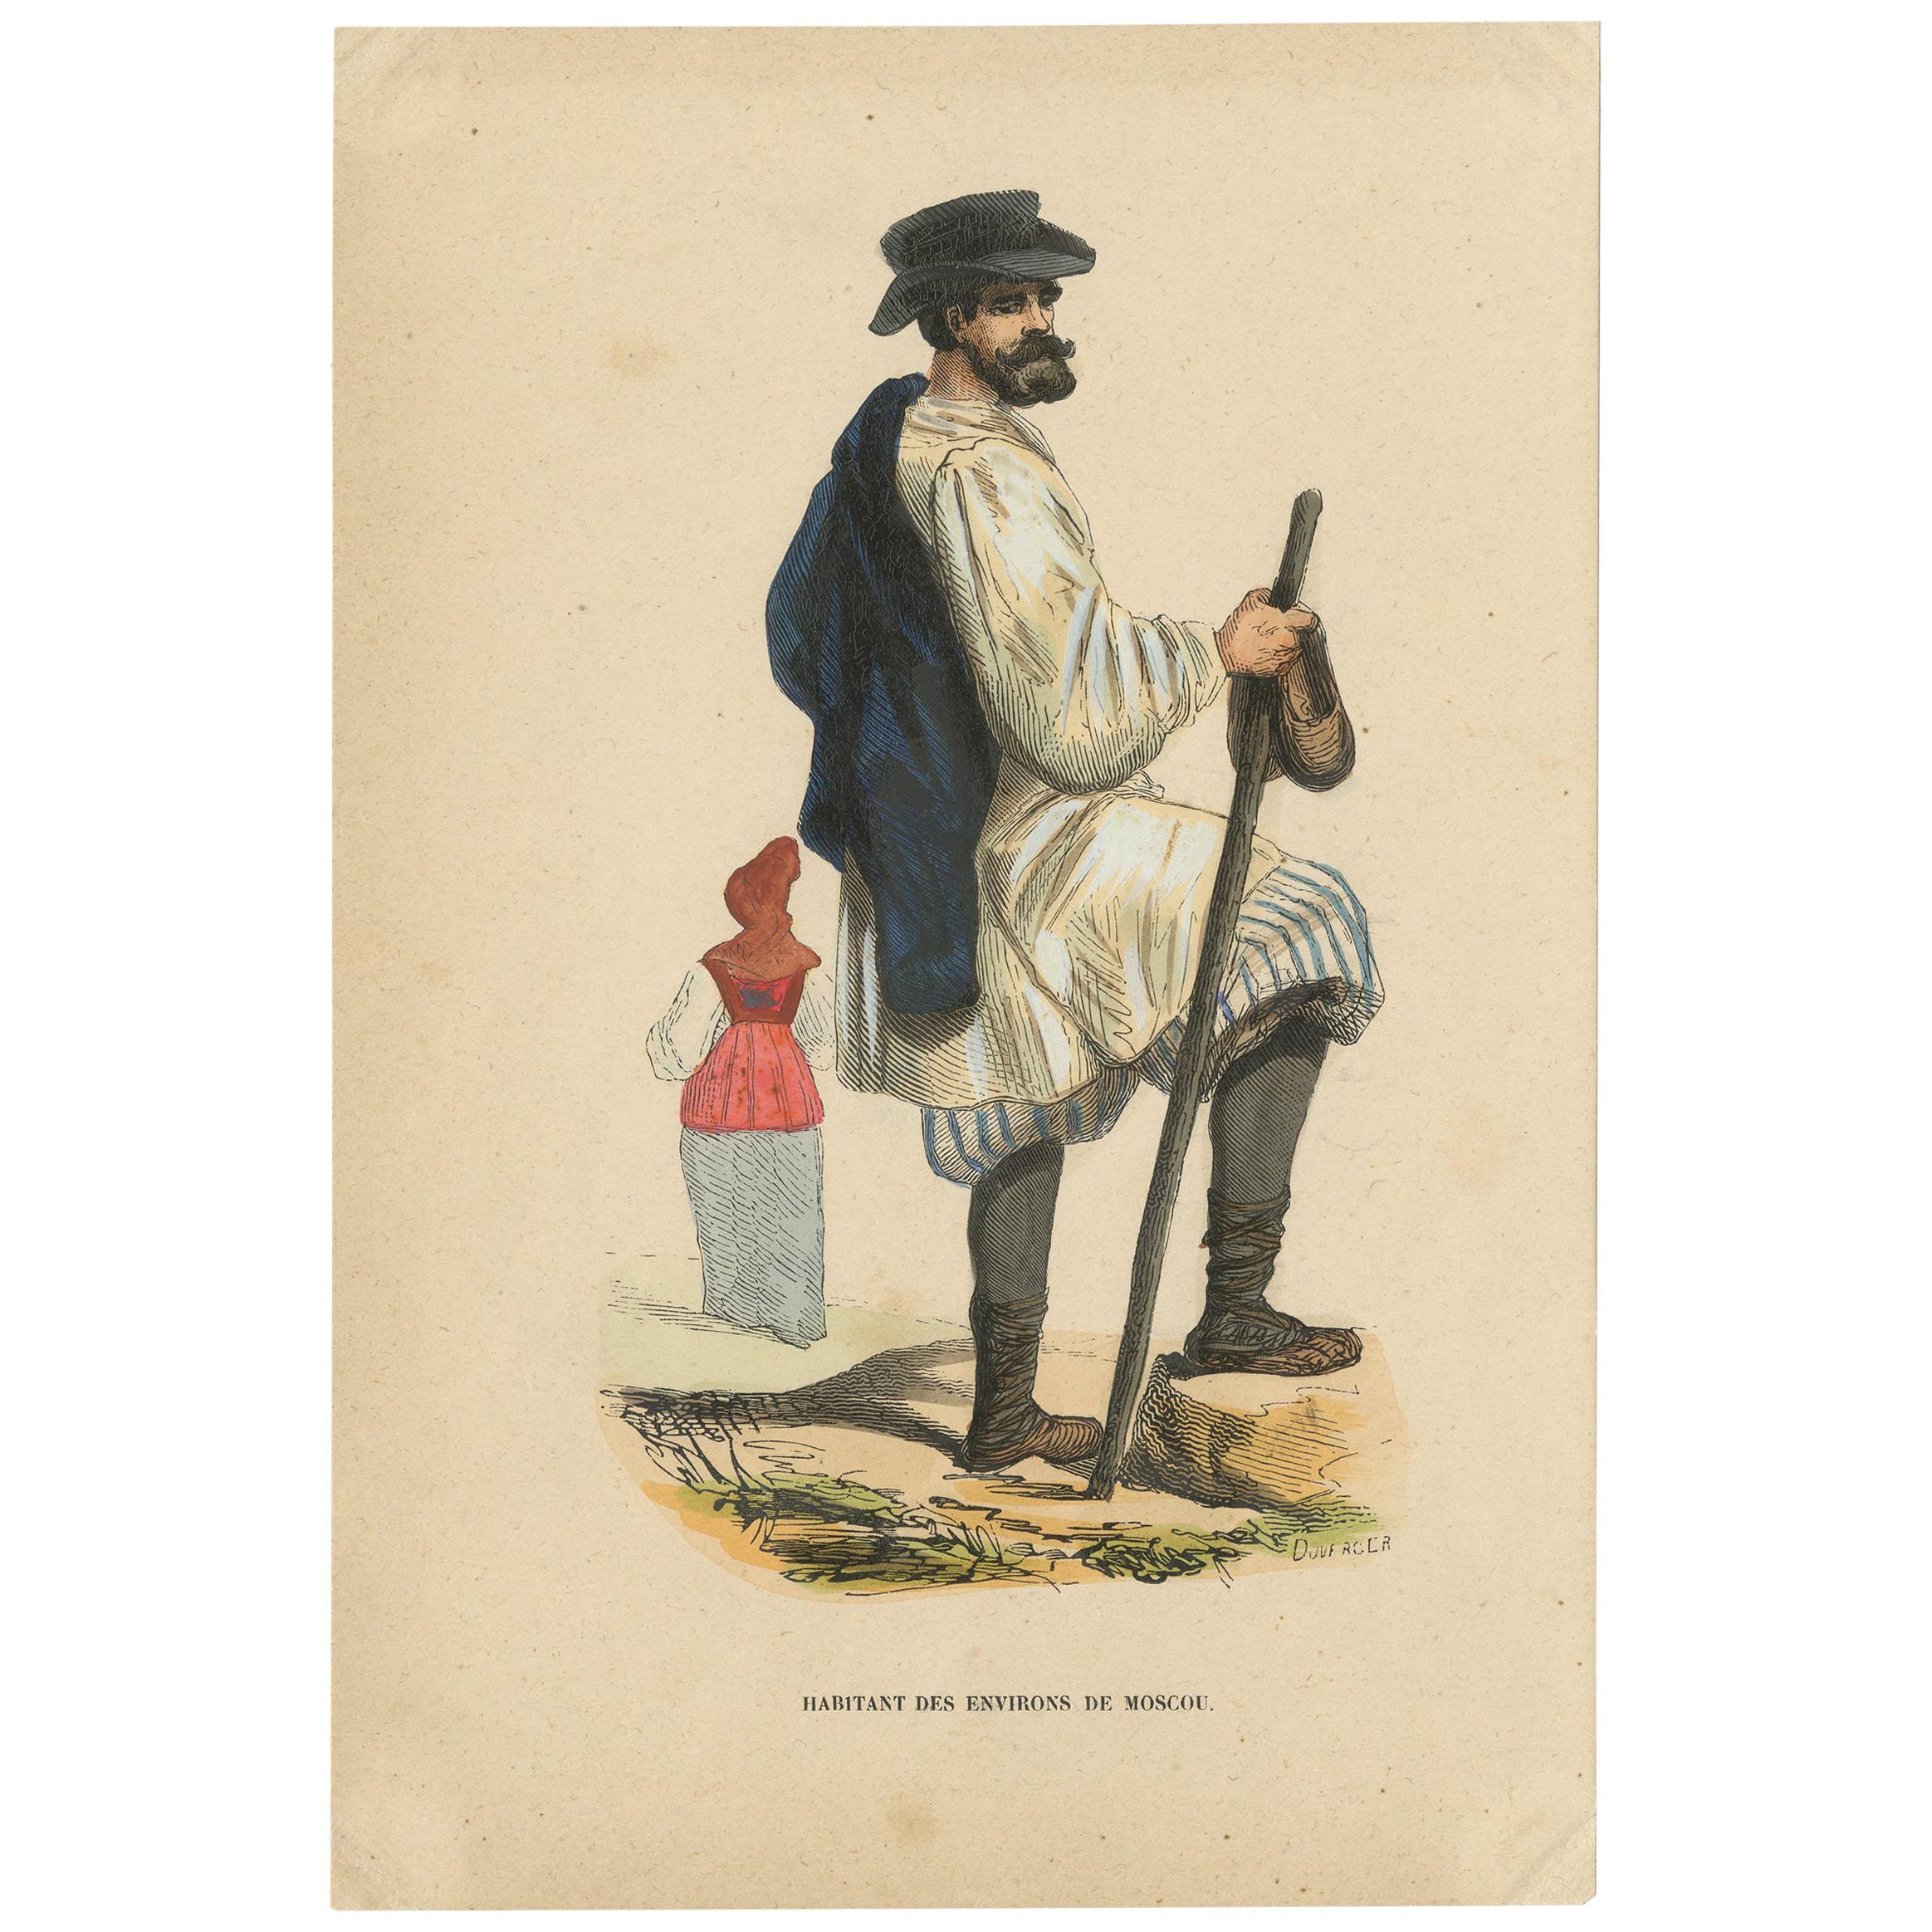 Antique Costume Print of an Inhabitant of the Region of Moscow by Wahlen, 1843